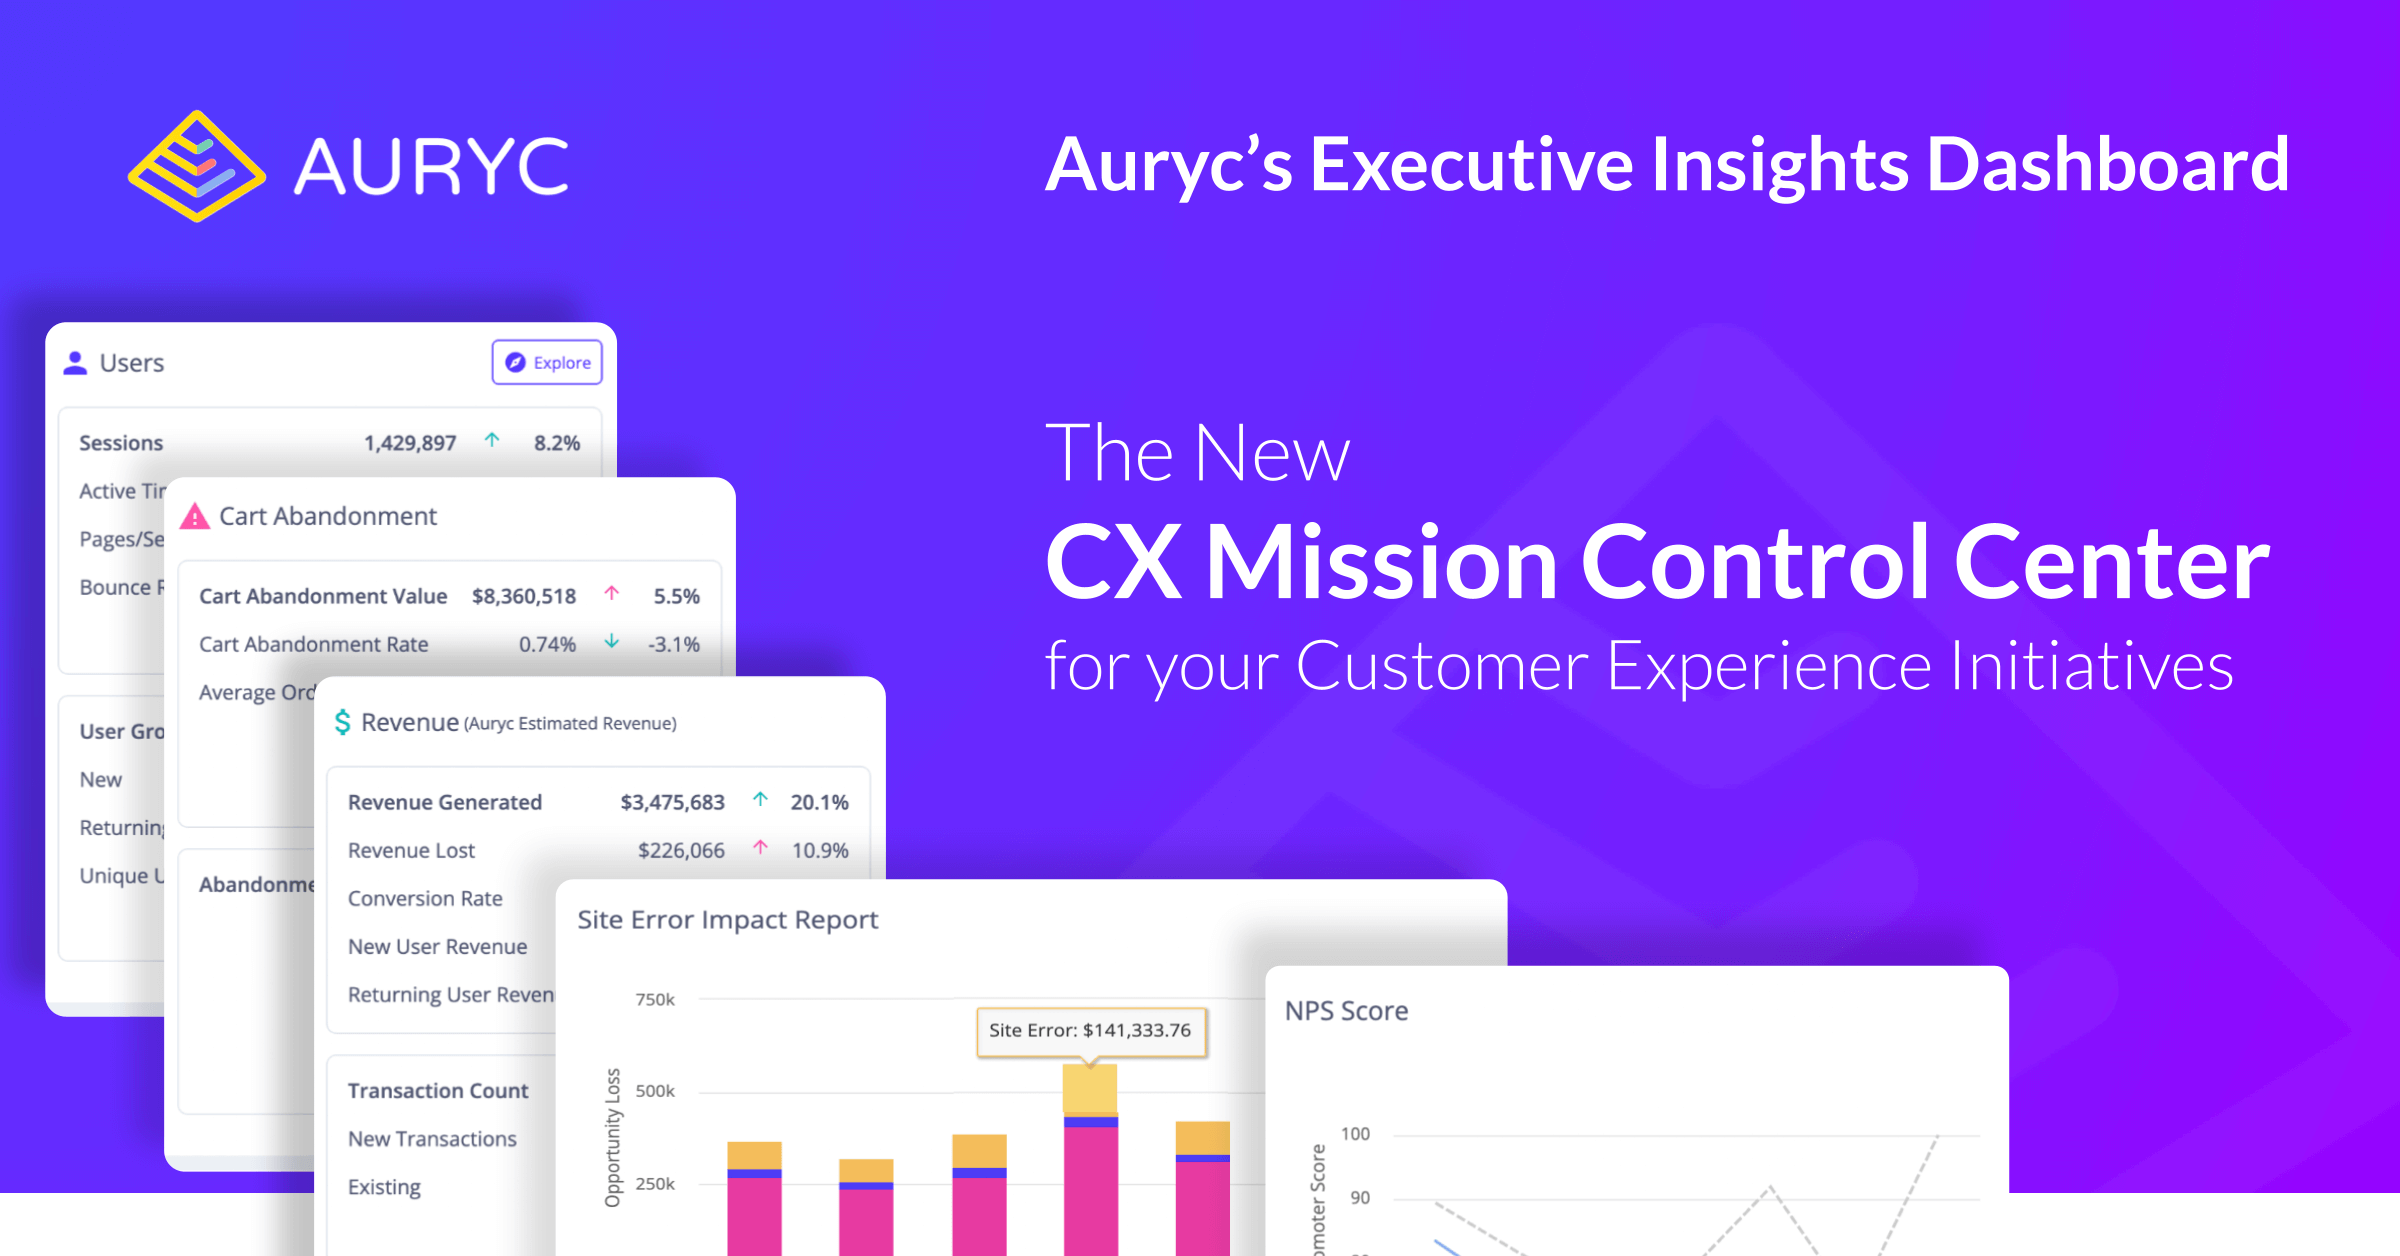 Auryc-product-announcement-new-executive-insight-dashboard-mission-control-center-for-cx-customer-experience (1)